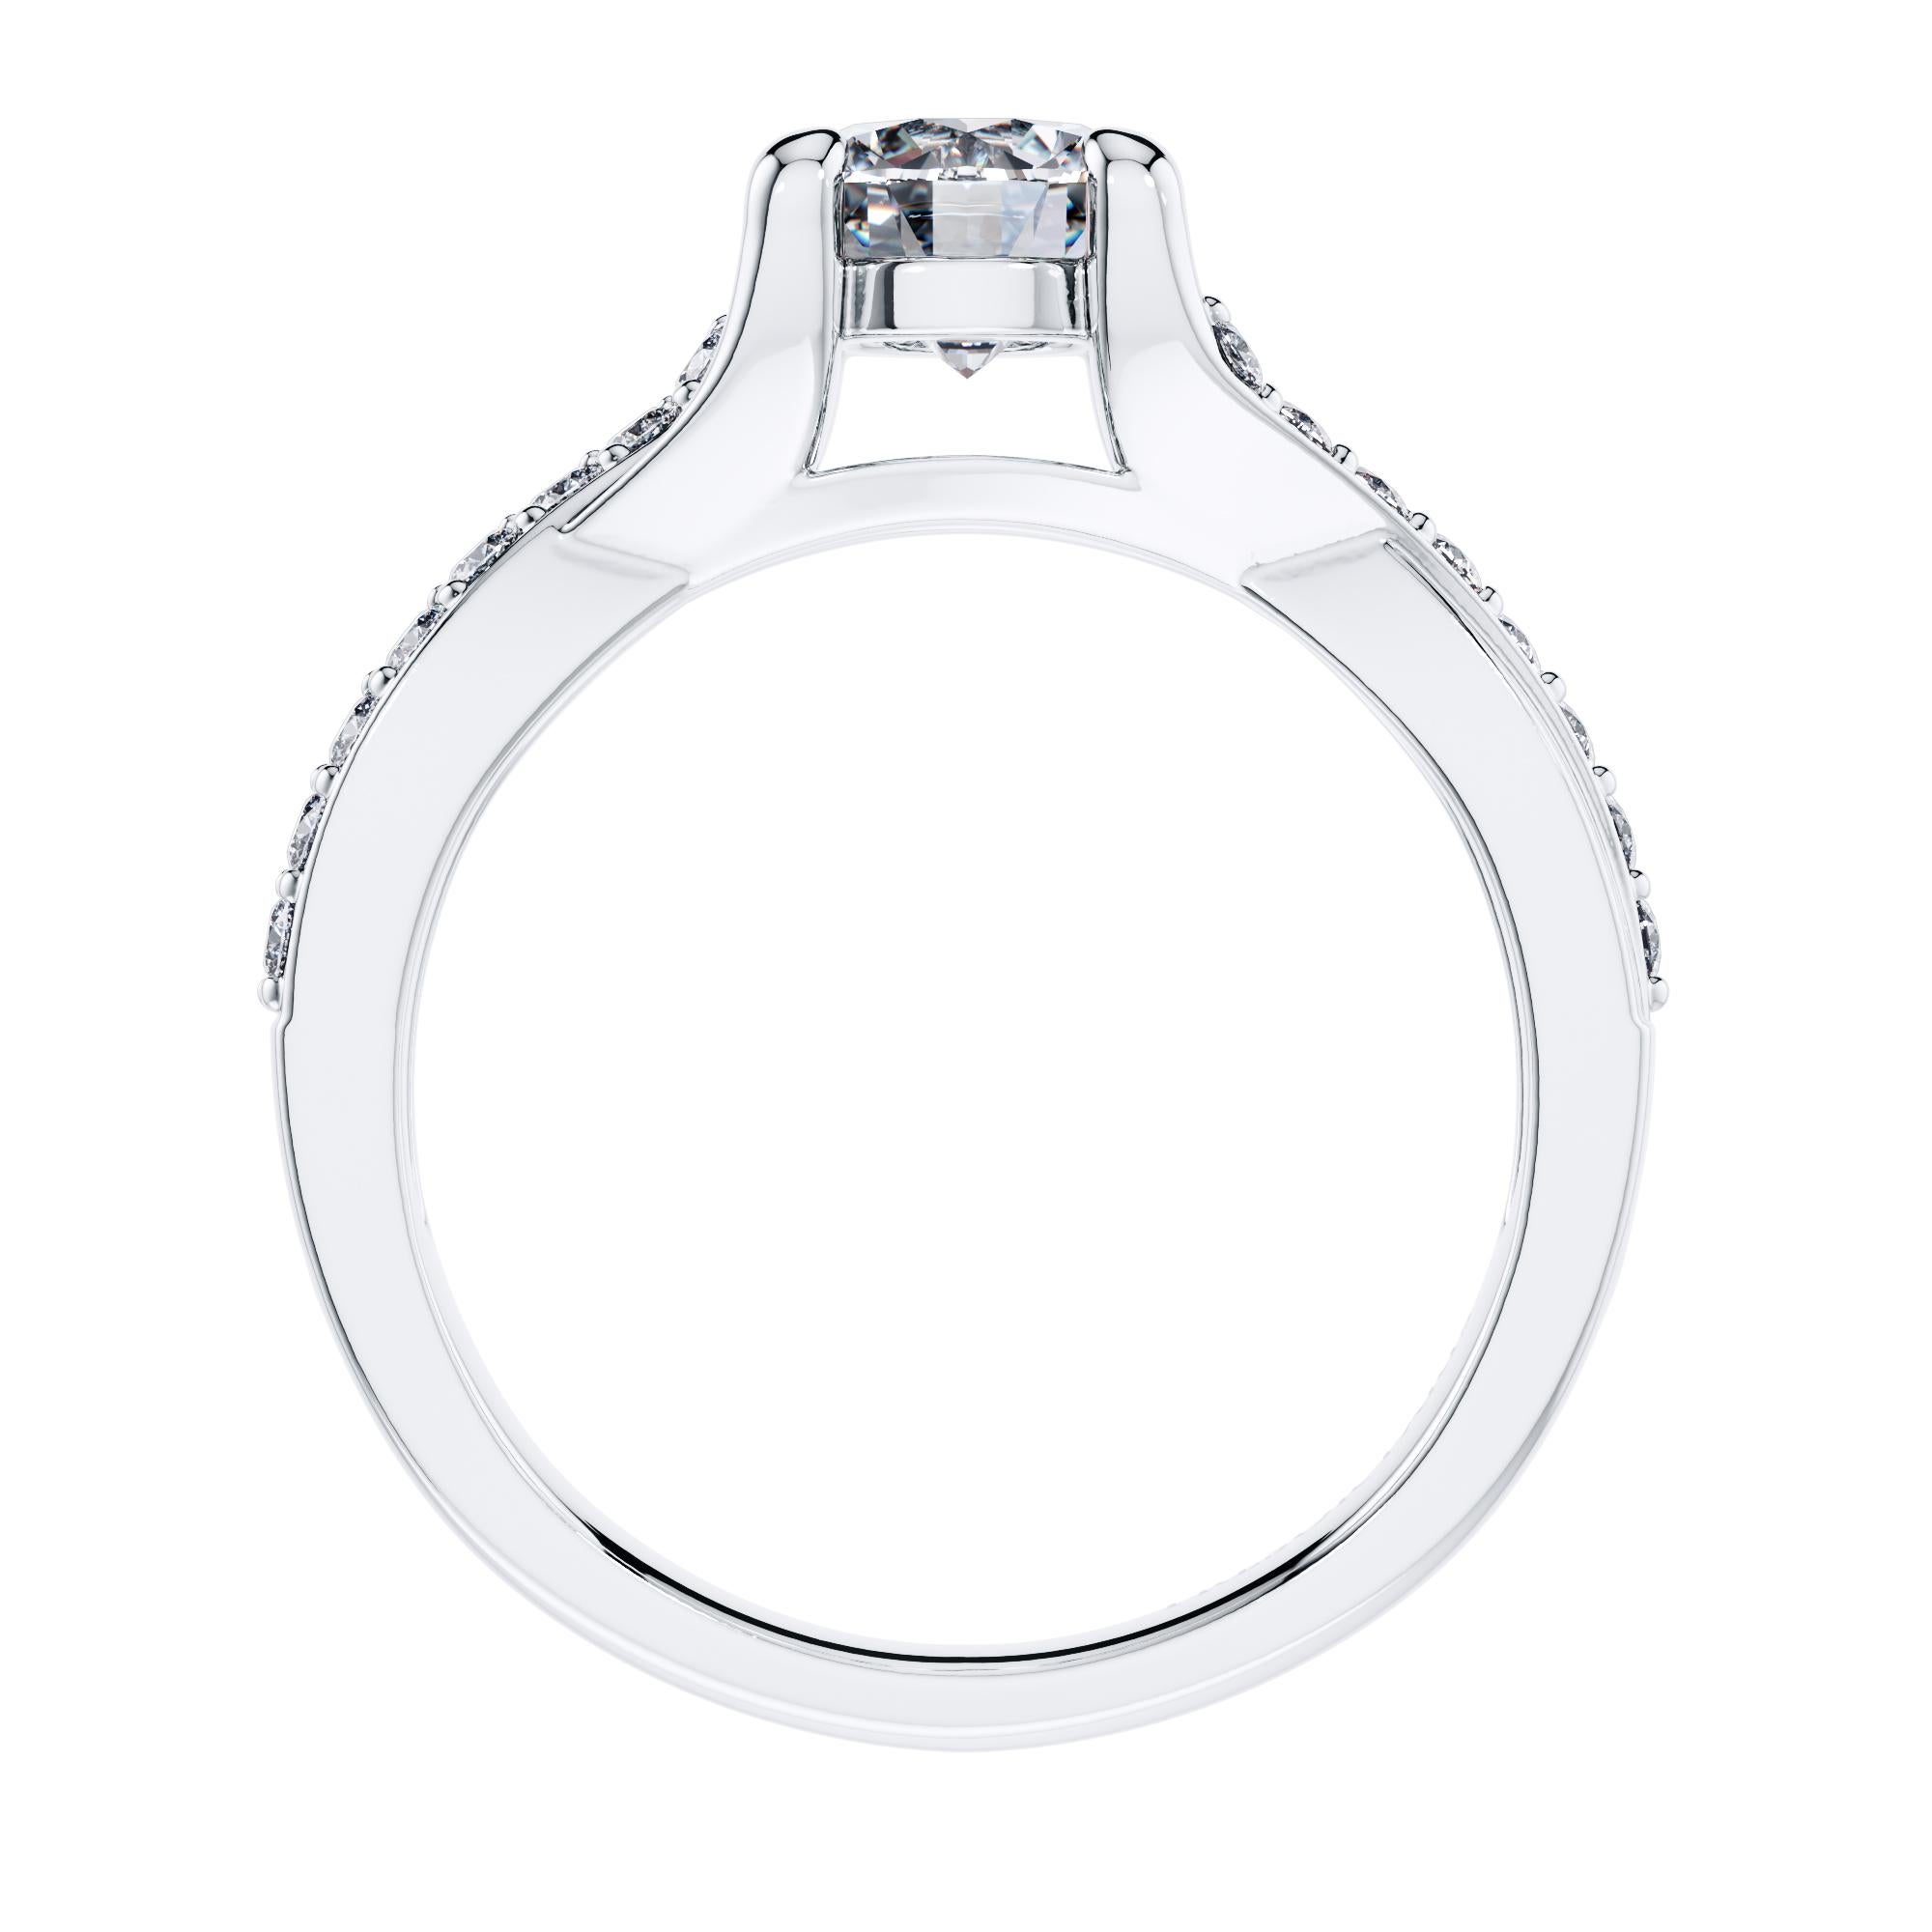 For a beautifully entwined journey together, this gleaming twisted vine modern classic engagement ring. Handmade in high grade Platinum 950 to British Standard, with a total of 0.94 Carat White Diamonds. Set in an open gallery 4 prong mount with a